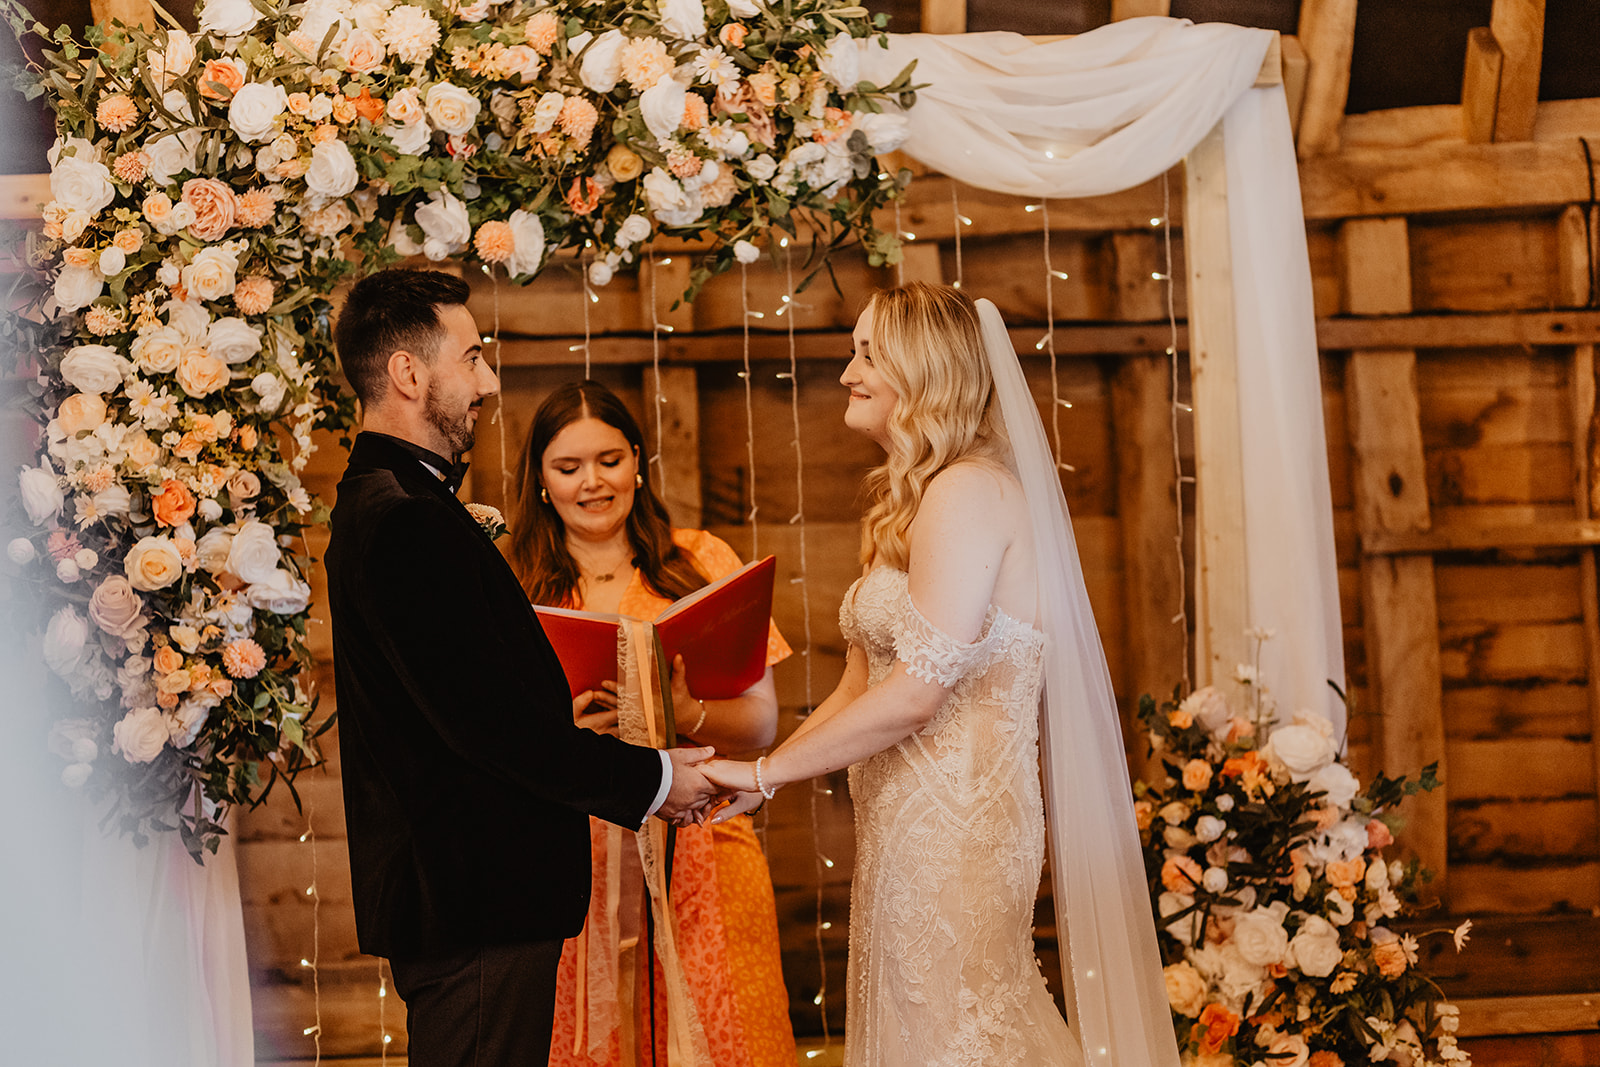 Bride and groom exchange vows at a Southlands barn wedding, Sussex. Photo by OliveJoy Photography.